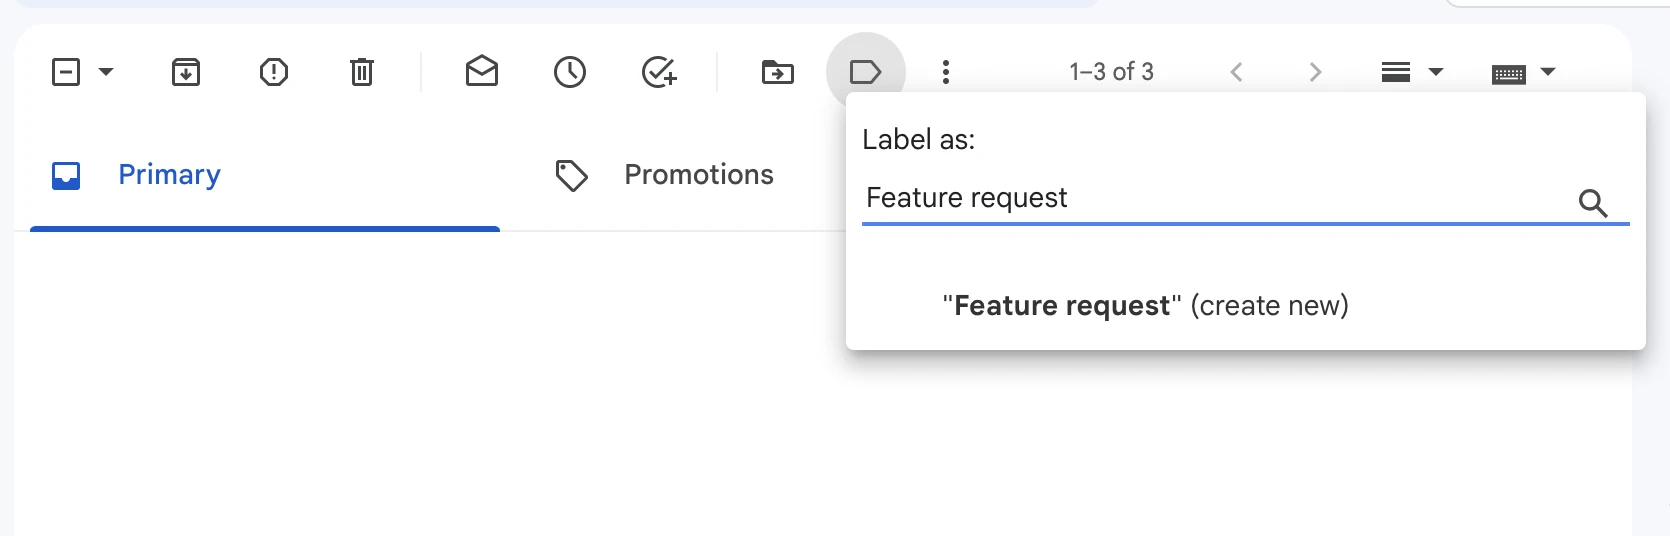 Gmail's filters and labels